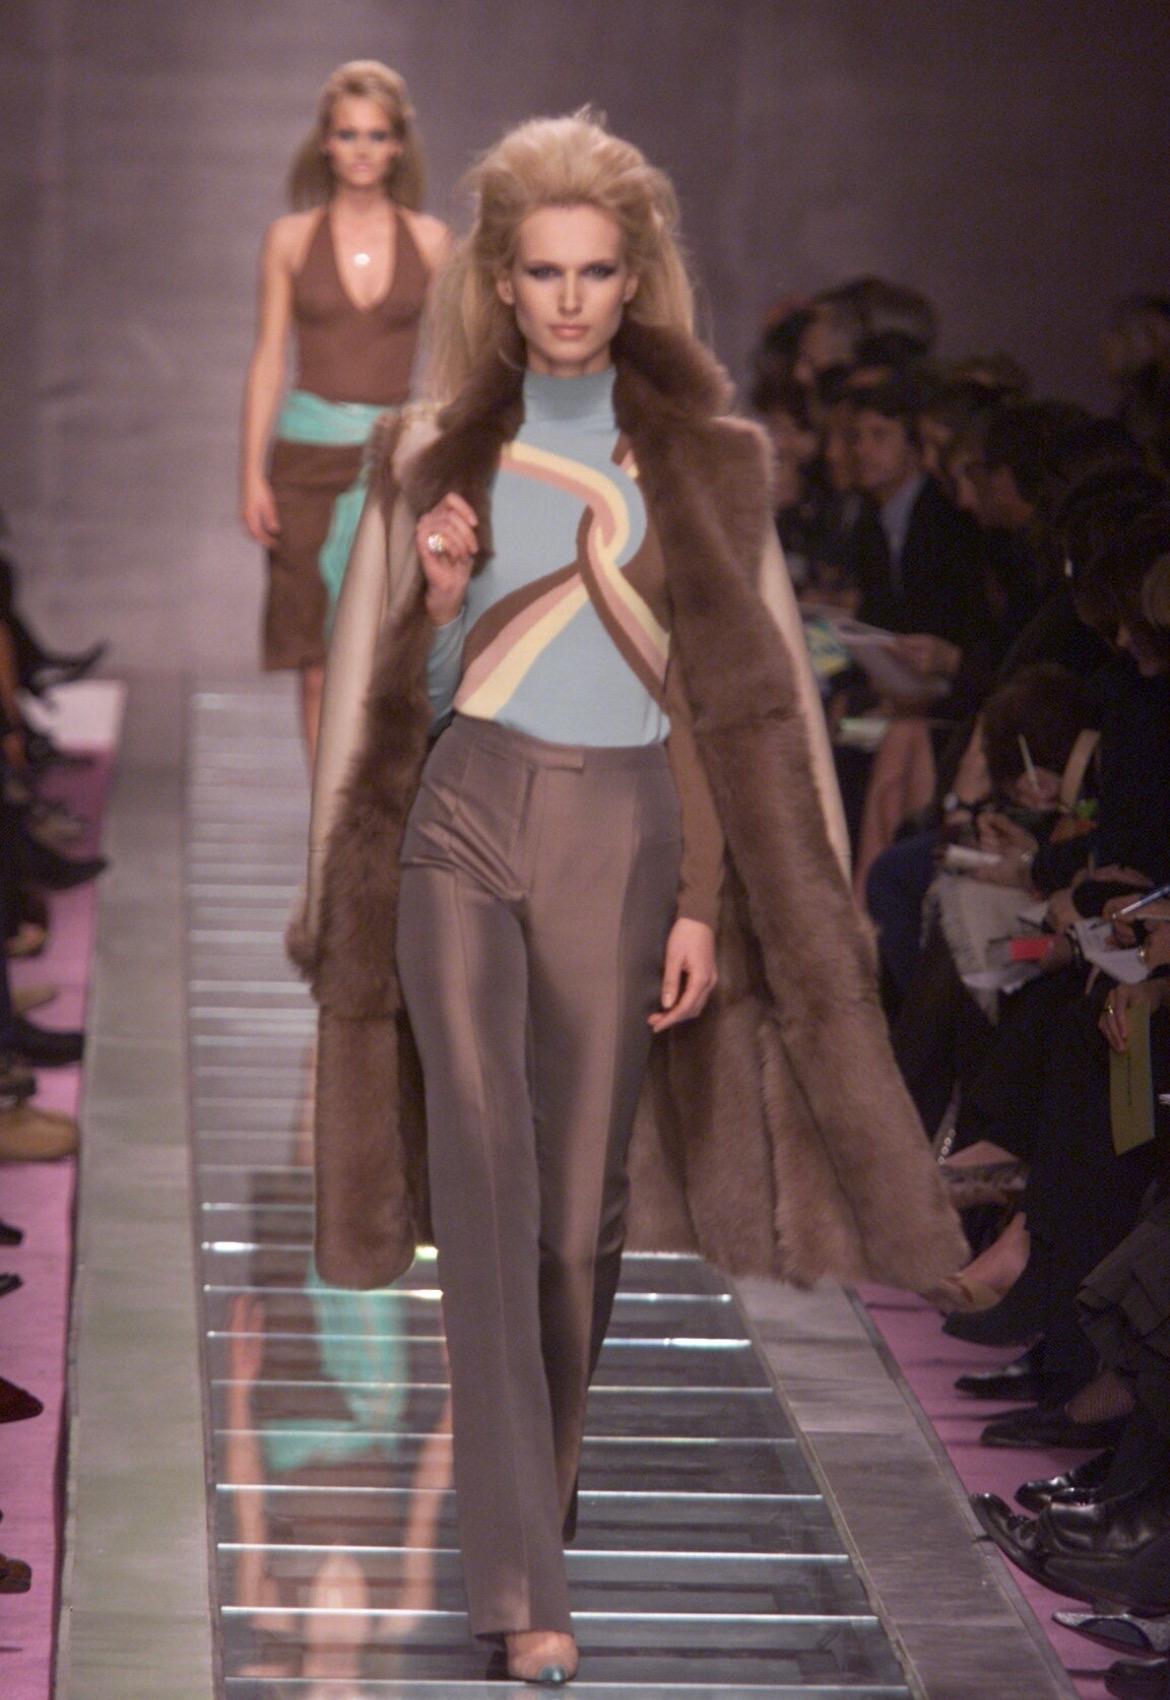 Presenting a fabulous tan leather Gianni Versace coat with fur accents, designed by Donatella Versace. From the Fall/Winter 2000 collection, this coat debuted on the season's runway as part of look 17, modeled by Inga Savits. The coat was also